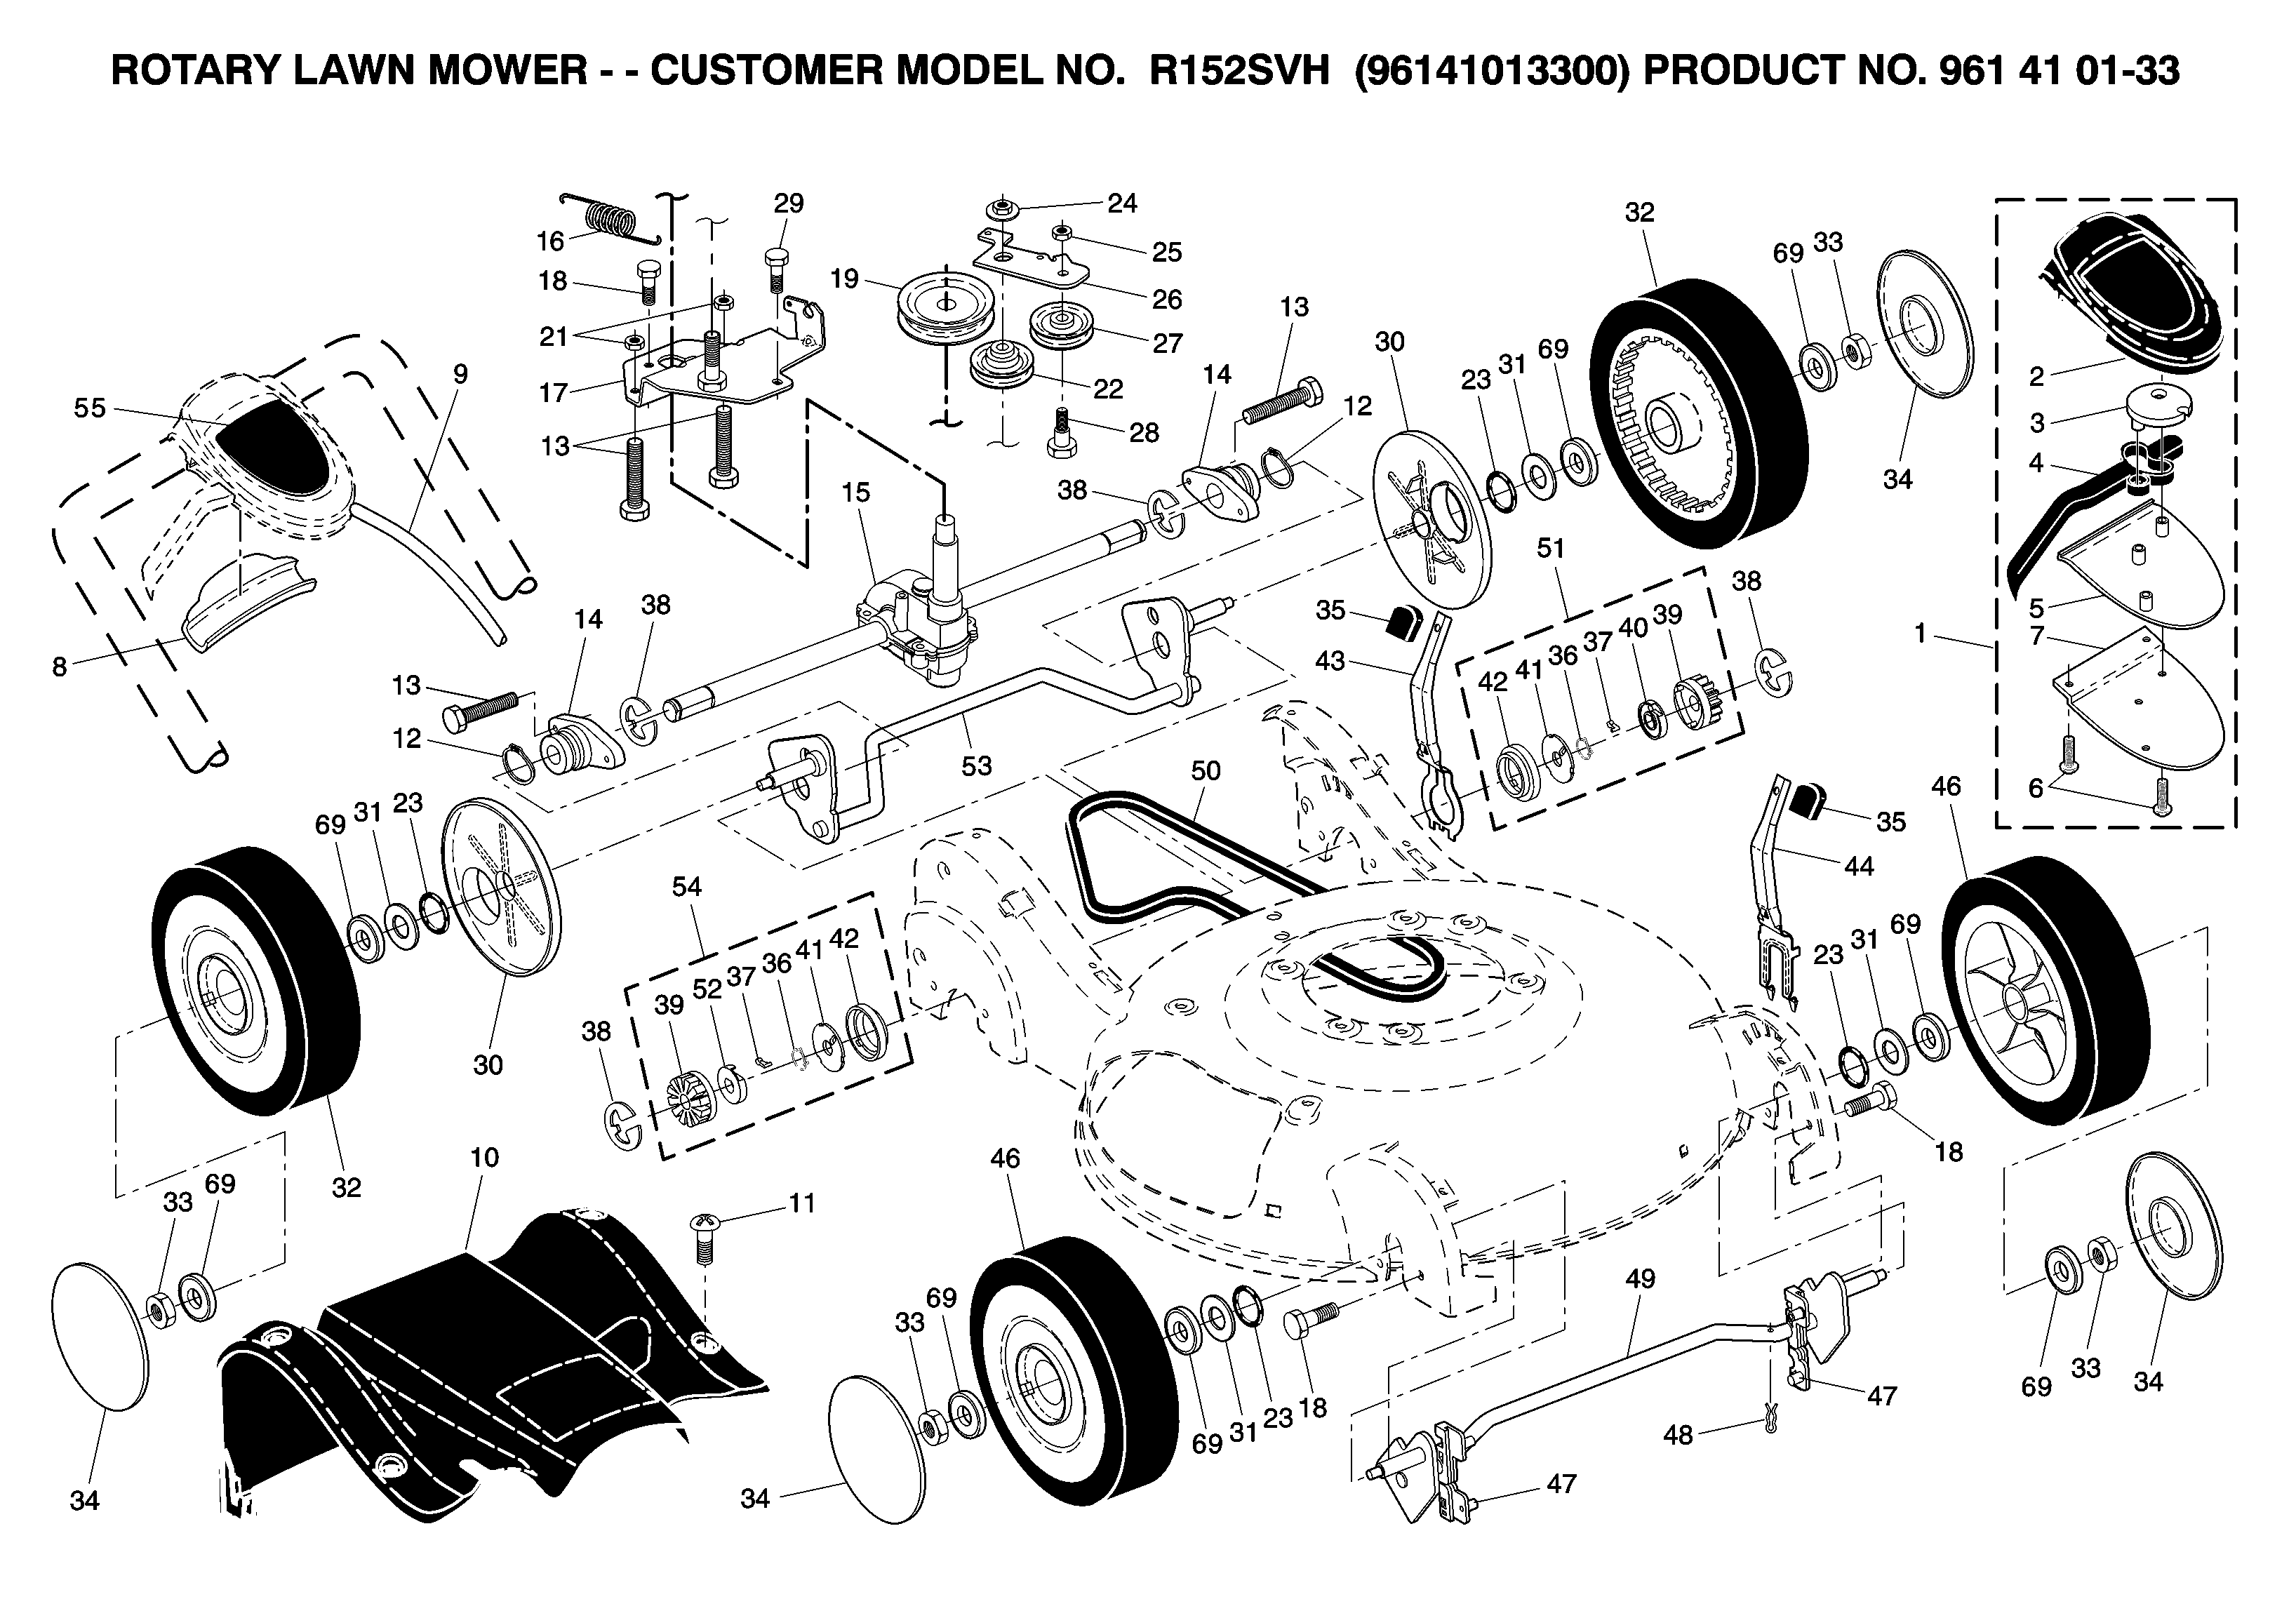 Chassis and appendix 532197012, 532414555, 532187353, 532425662, 532414555, 532181698, 532400723, 532186297, 532197011, 532188356, 532194188, 583607301, 532194186, 532187120, 532188294, 532194124, 532194438, 532163409, 532194128, 532050675, 532193791, 532197480, 532409149, 873930500, 532194123, 532166043, 532160829, 817060410, 532183457, 532088348, 532192622, 532409149, 532183442, 532185994, 532188291, 532175098, 812000058, 532175103, 532175105, 532175104, 532184172, 532188508, 532188509, 532192232, 532183438, 532169675, 532192431, 532183688, 532414860, 532175102, 532195995, 532414860, 532189378, 532169911